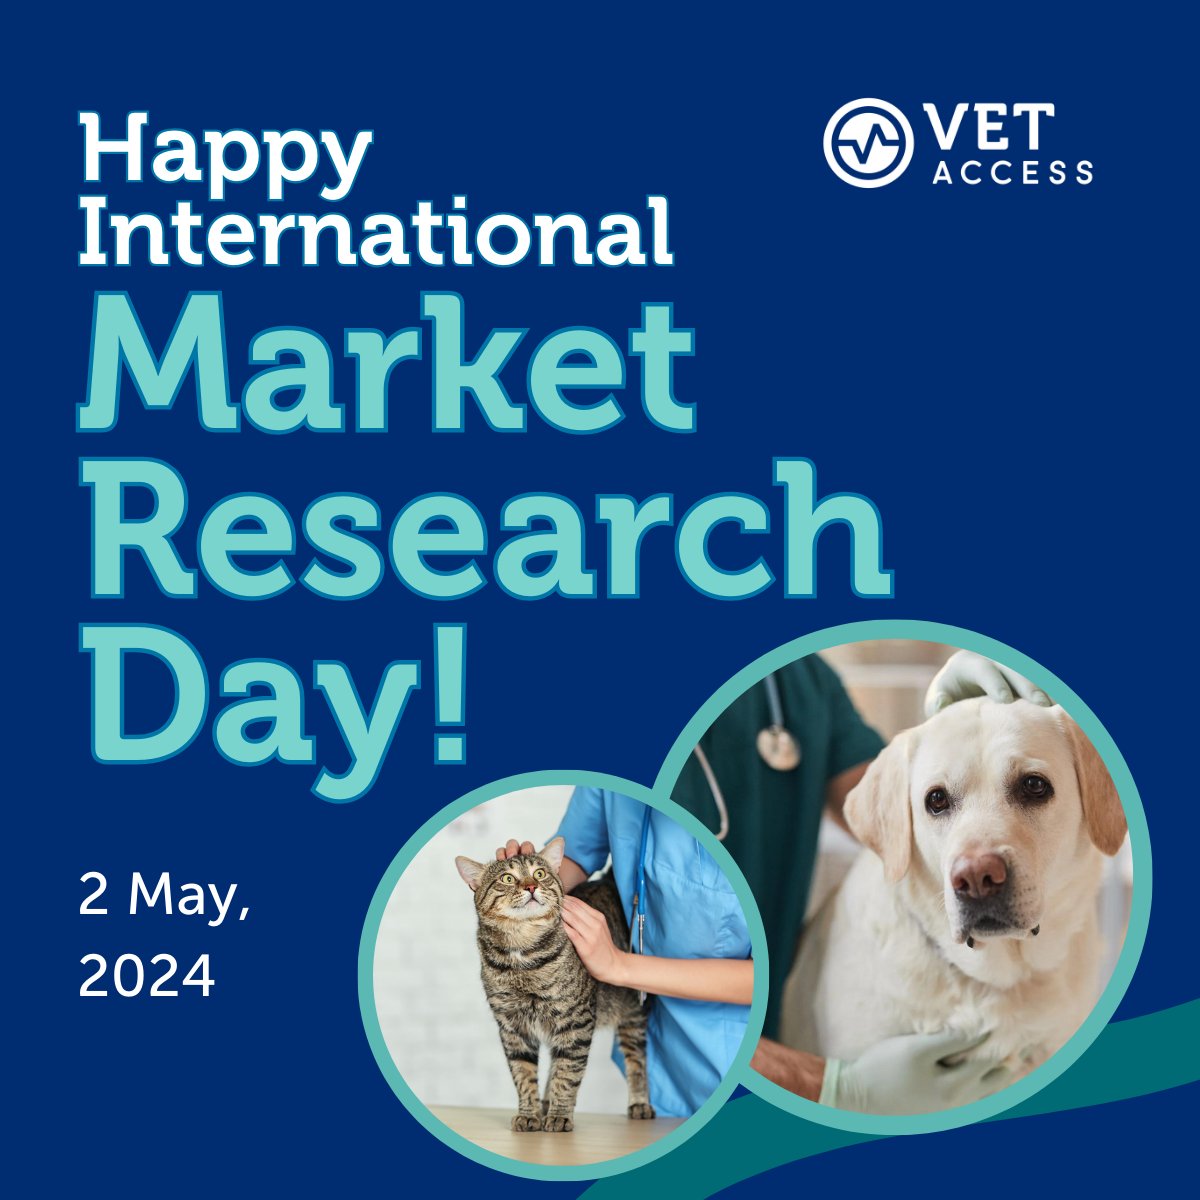 Happy International Market Research Day! We are celebrating the data, research, and insights professionals in the animal health industry that enhance animal welfare everywhere. 🐾

#vetaccess #marketresearch #animalhealth